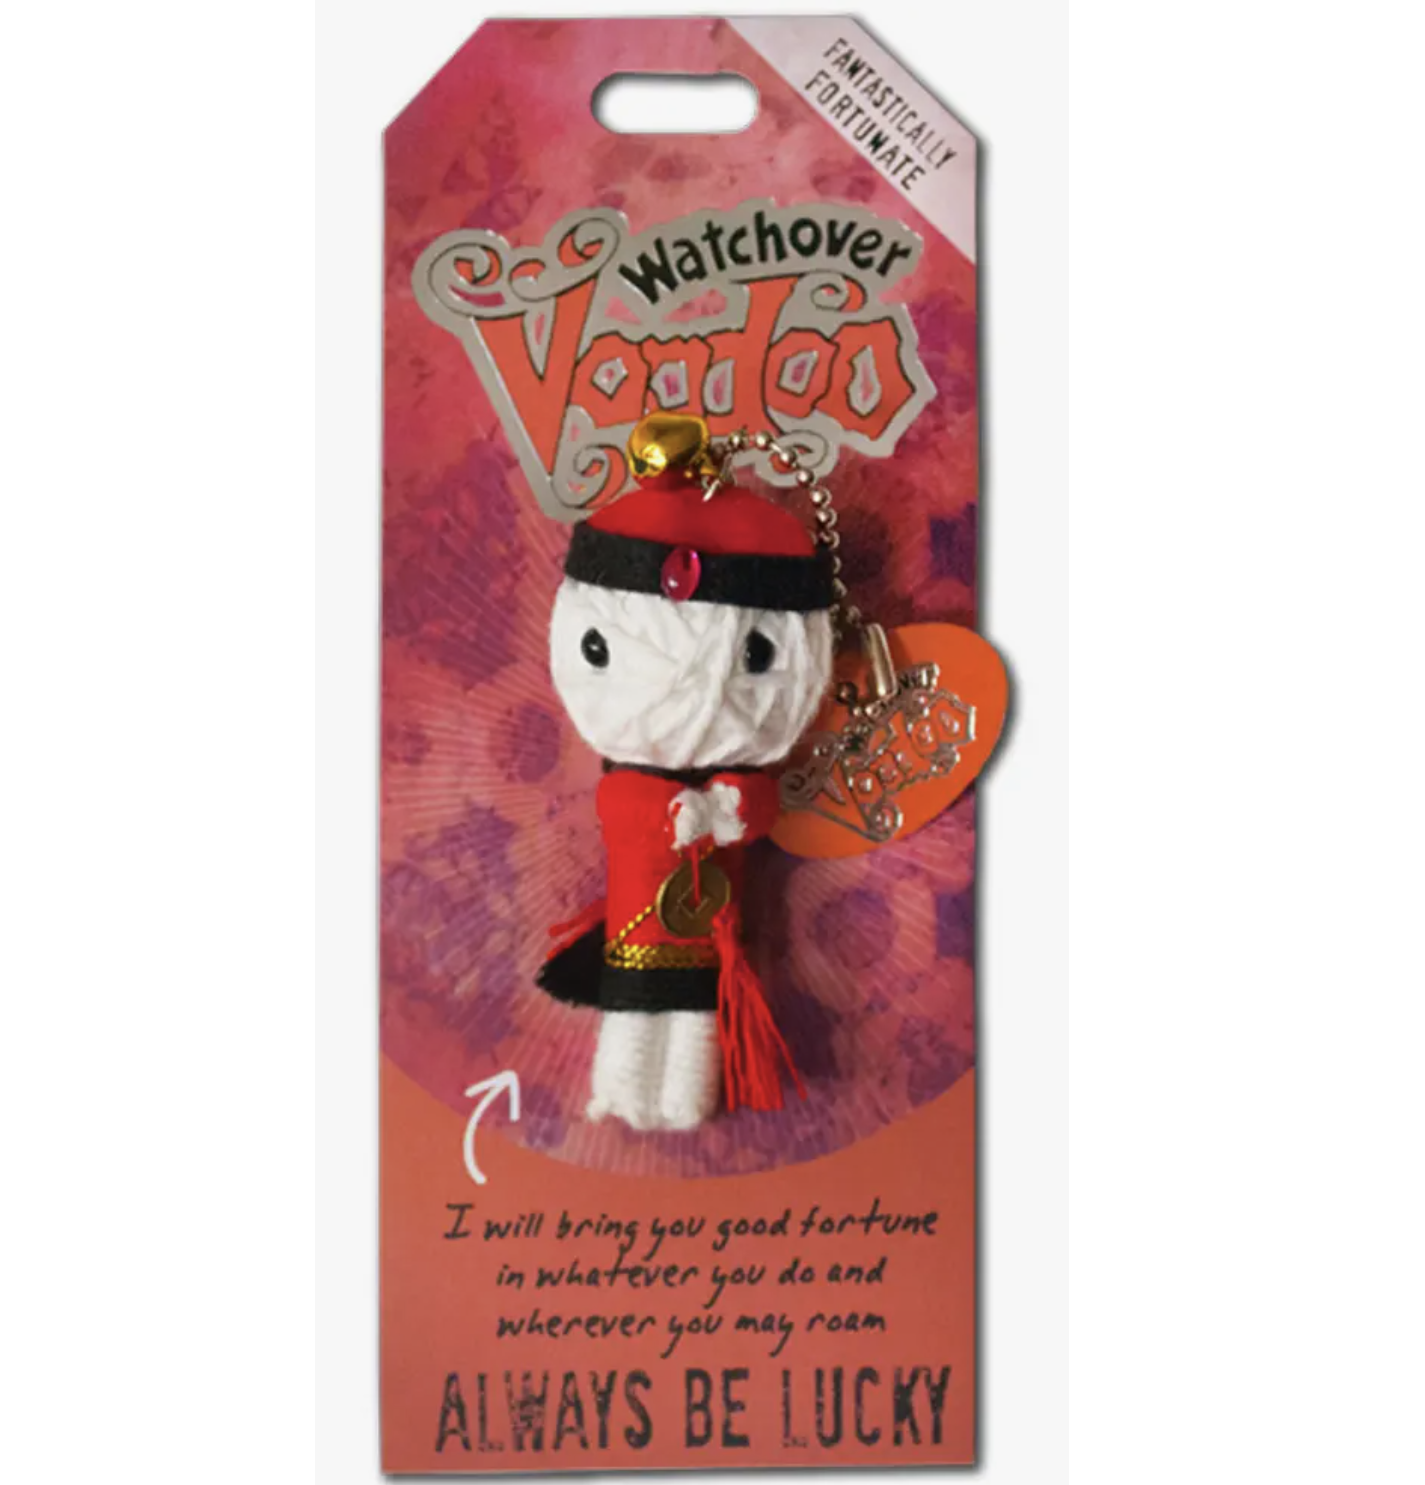 Always Be Lucky Voodoo Doll